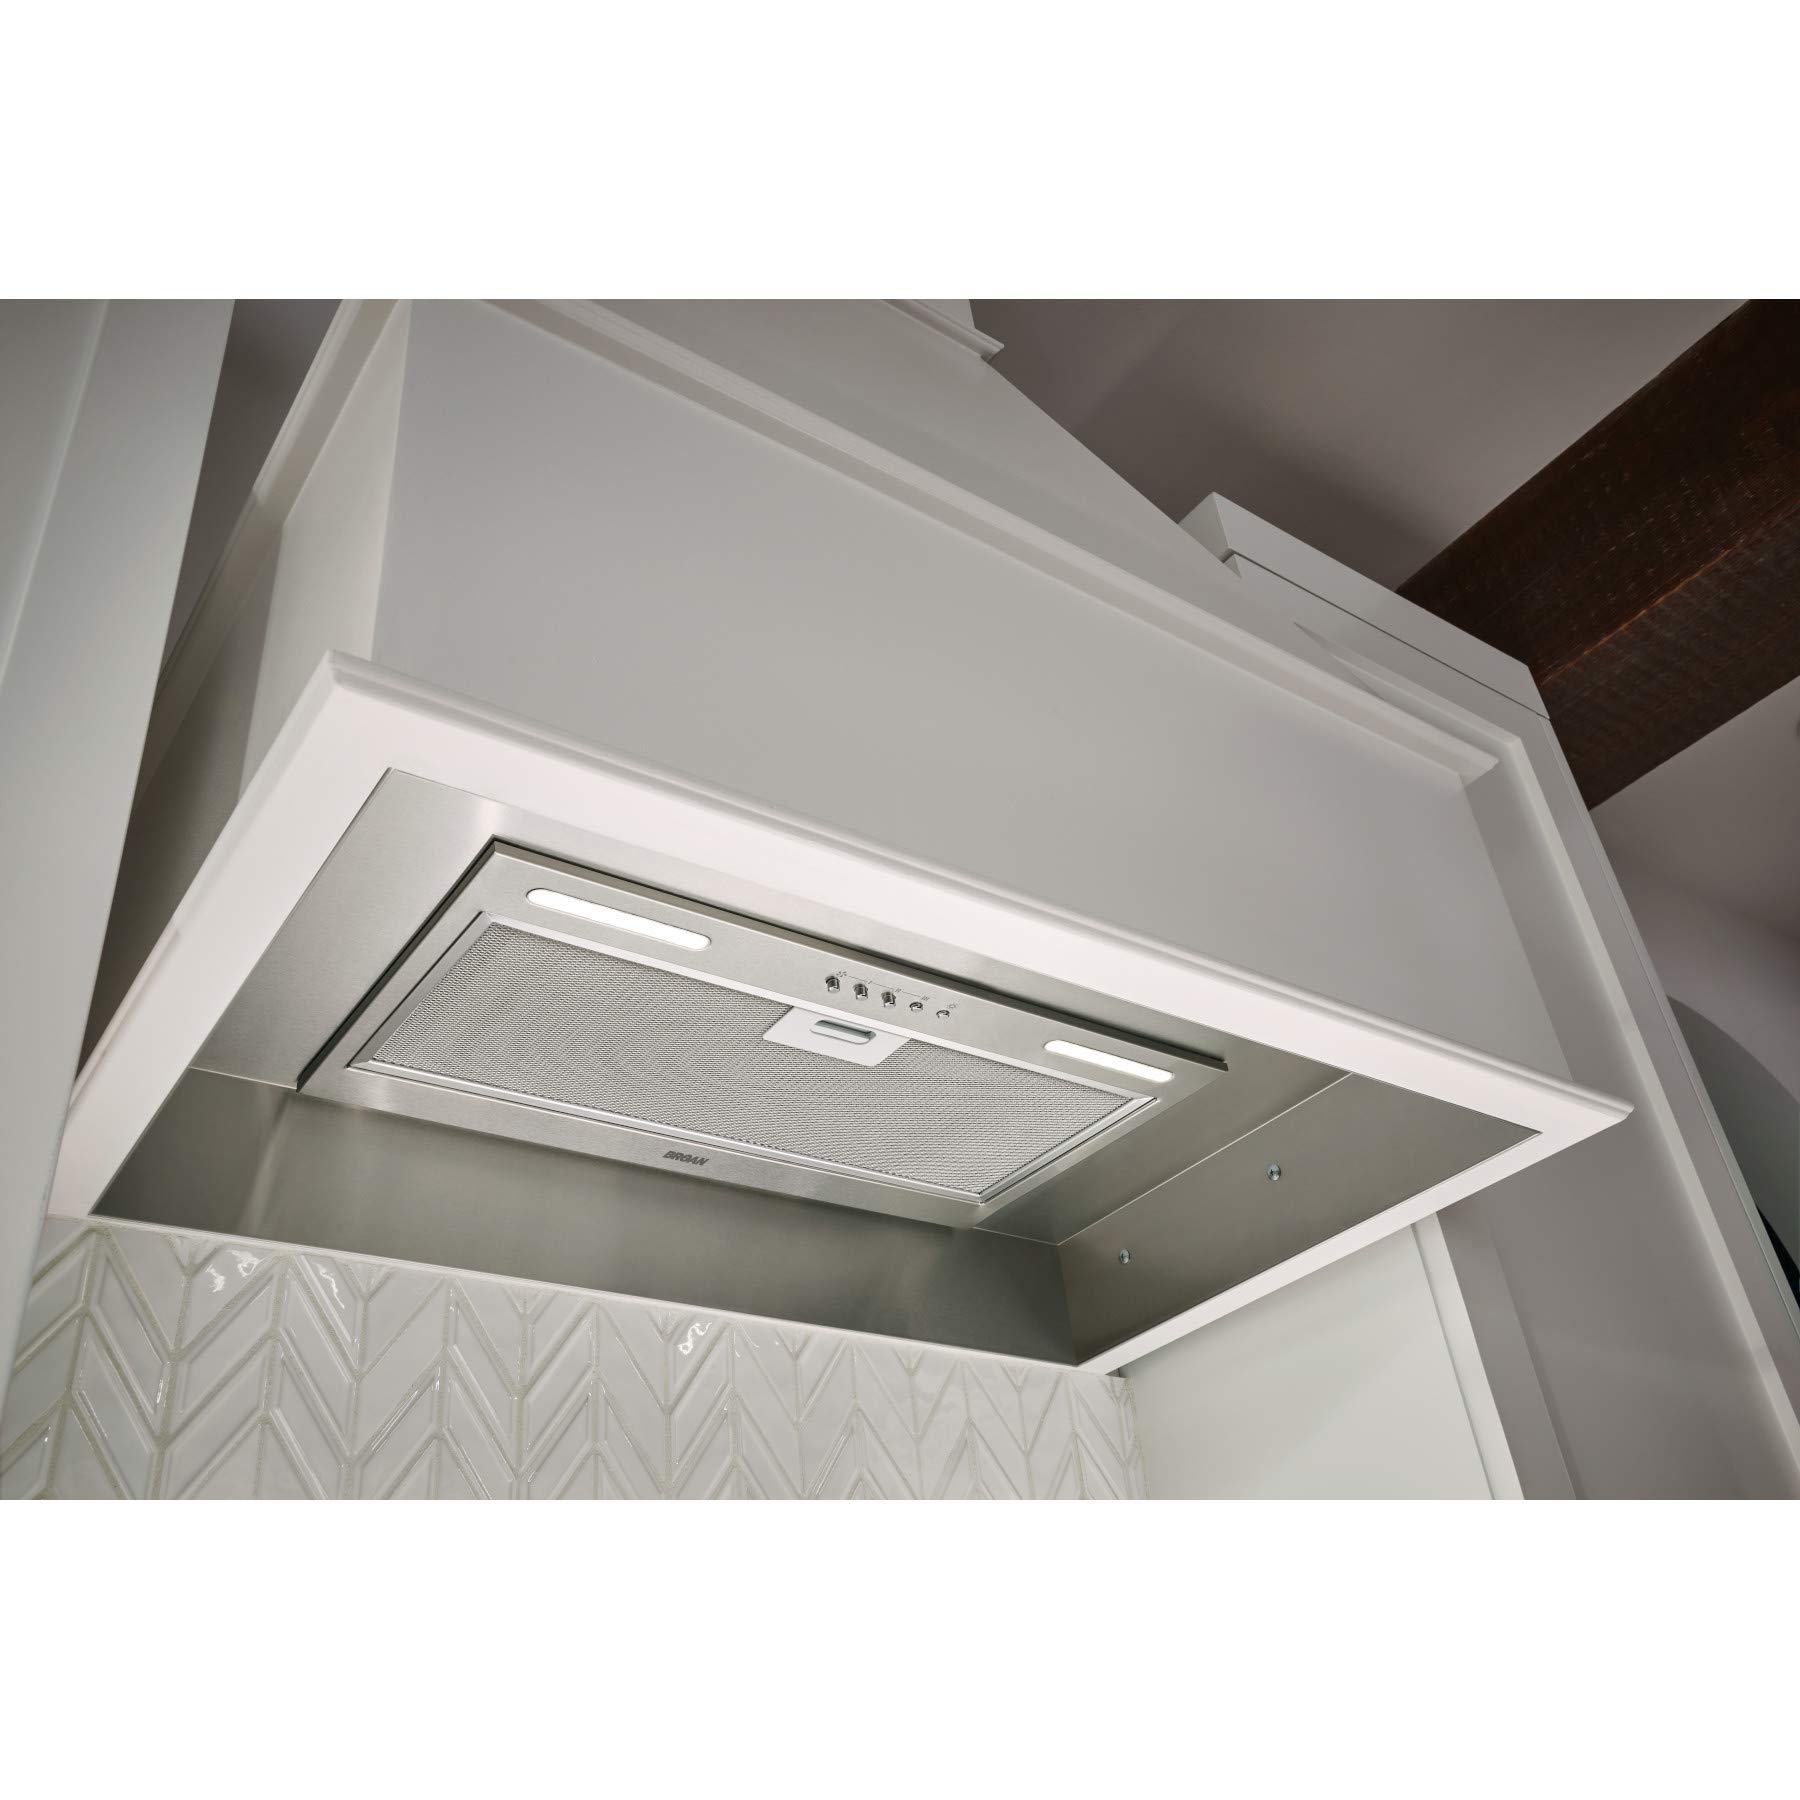 Broan-NuTone PM300SS Custom Power Pack Range Hood Insert with 2-Speed Exhaust Fan and Light, 300 Max Blower CFM & LB30SS Optional Box Power Pack Hoods, Stainless Steel, 30-Inch Range Liner